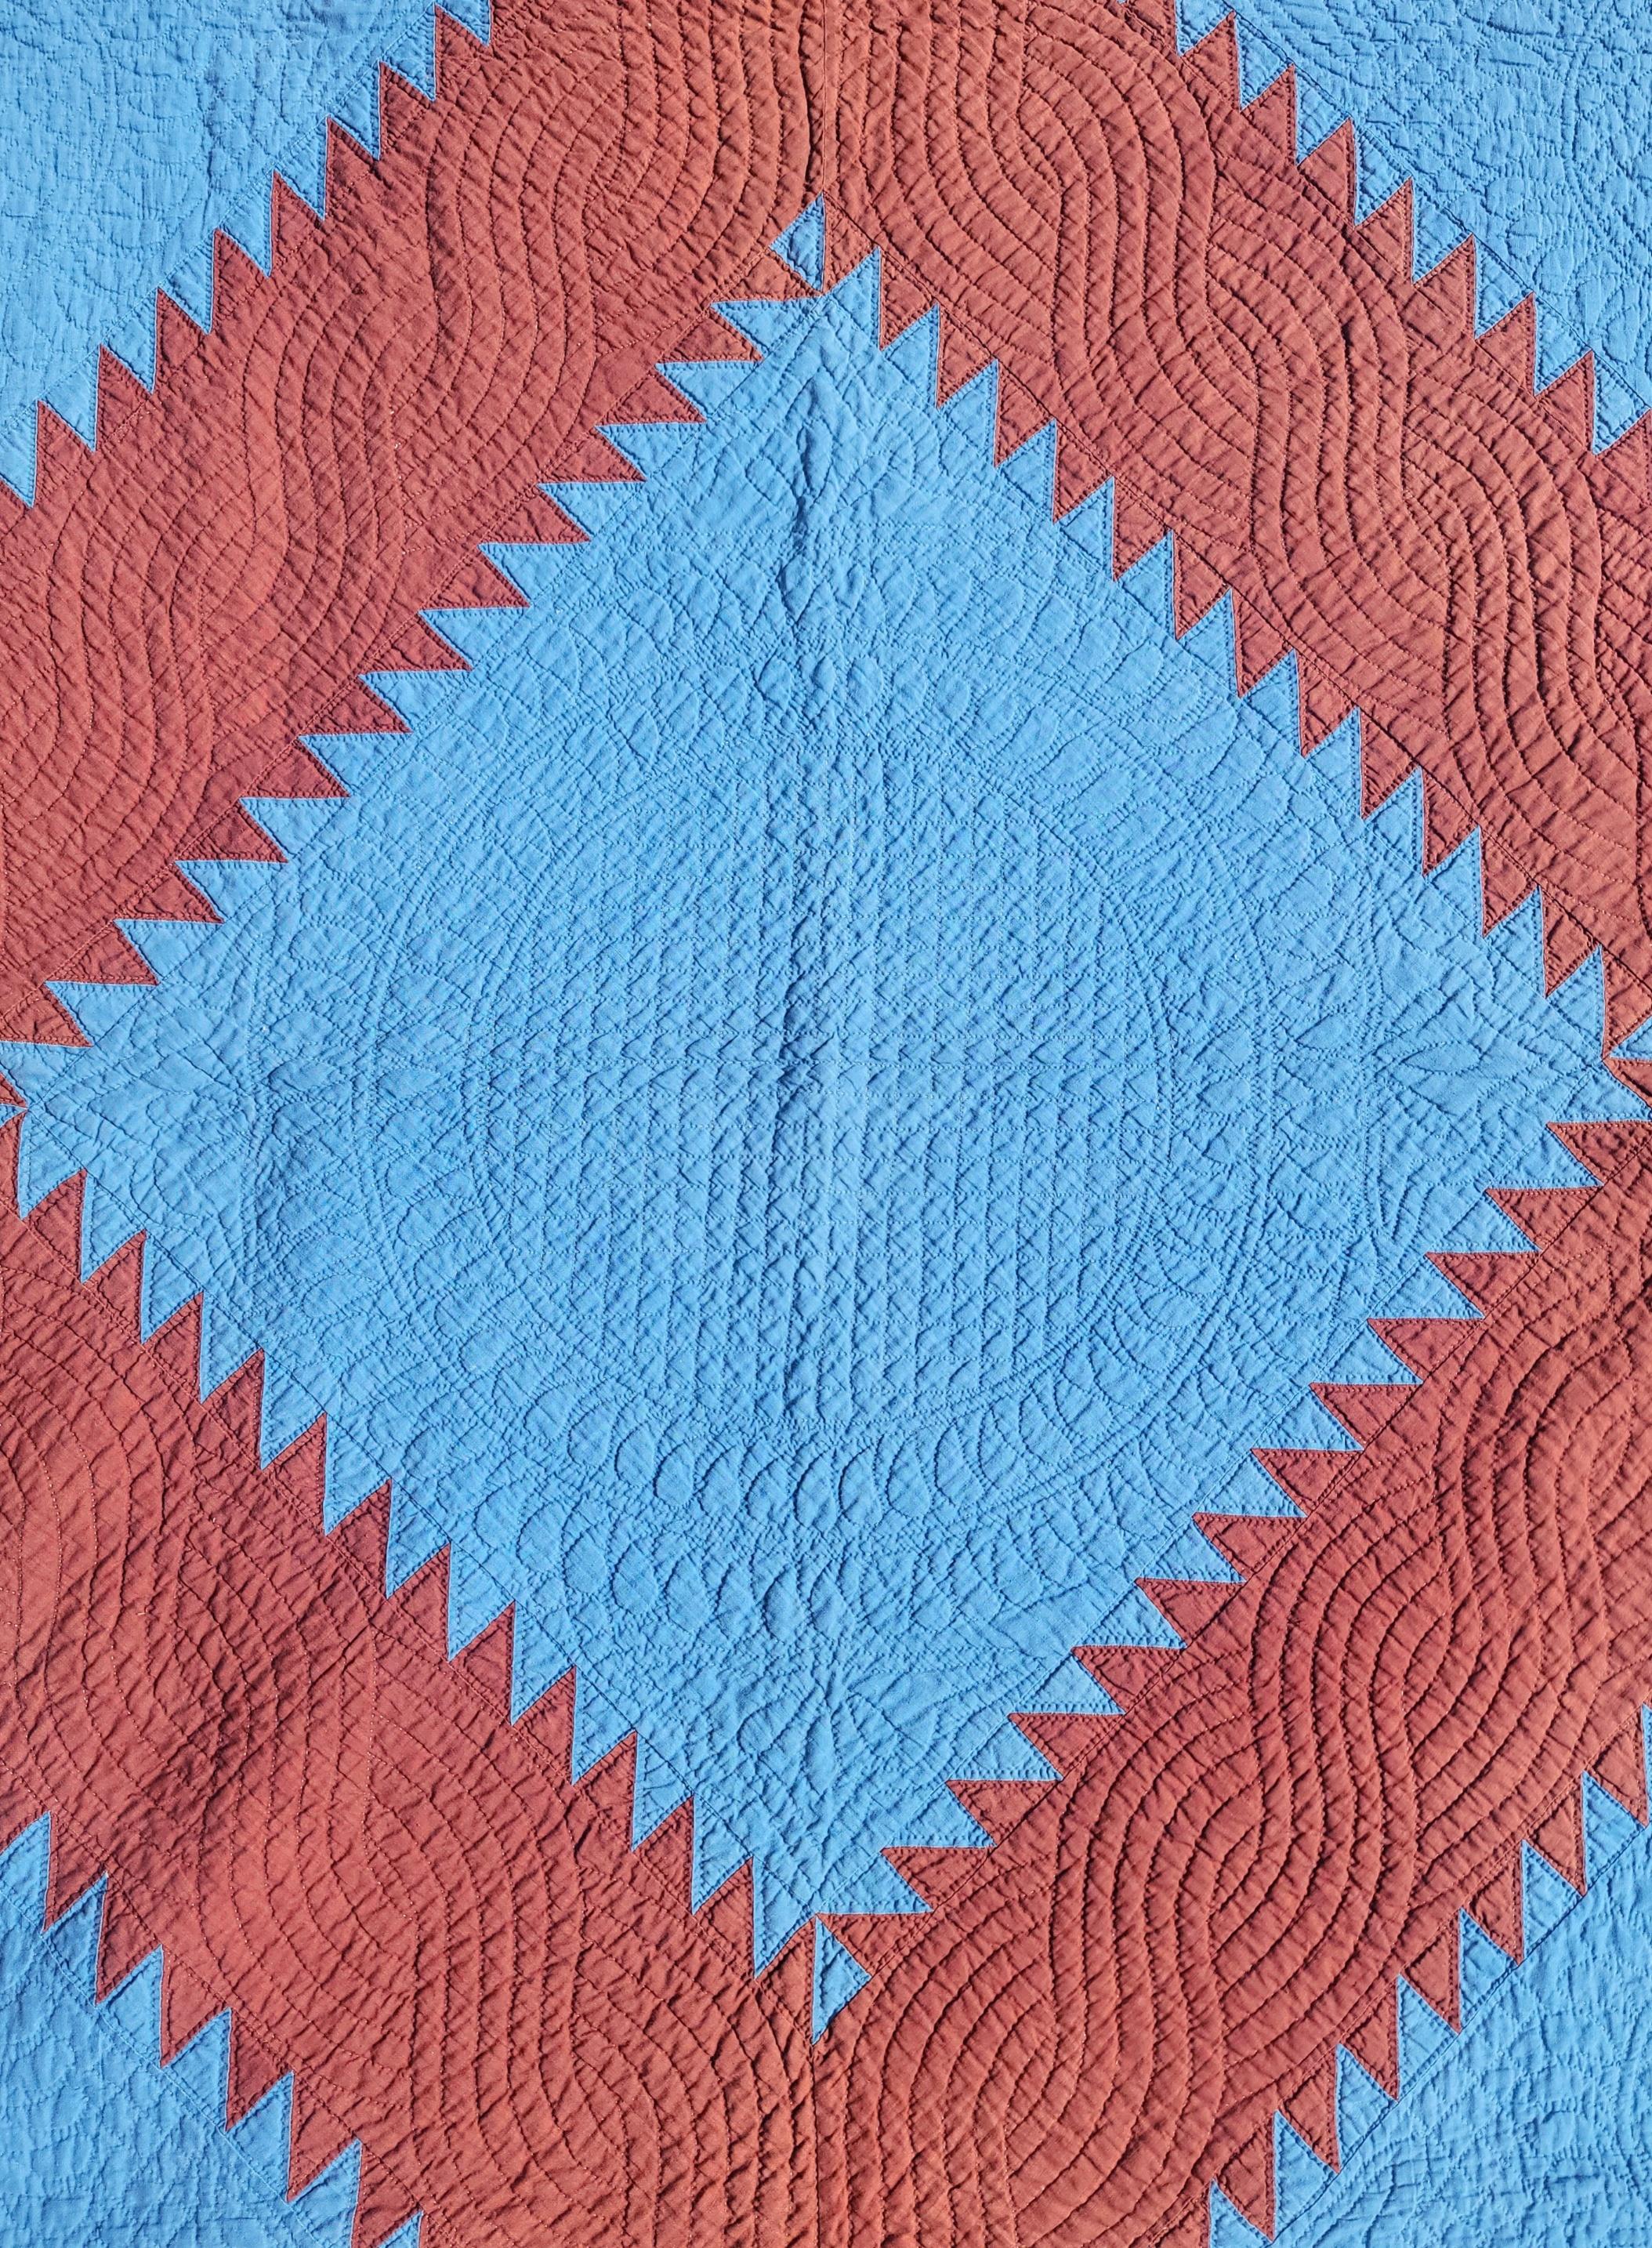 19Thc Cotton saw tooth diamond in a square quilt from Lancaster County,Pennsylvania circa 1870-1880.Notice the fine detailed quilting and wonderful piecework.
The condition is pristine.